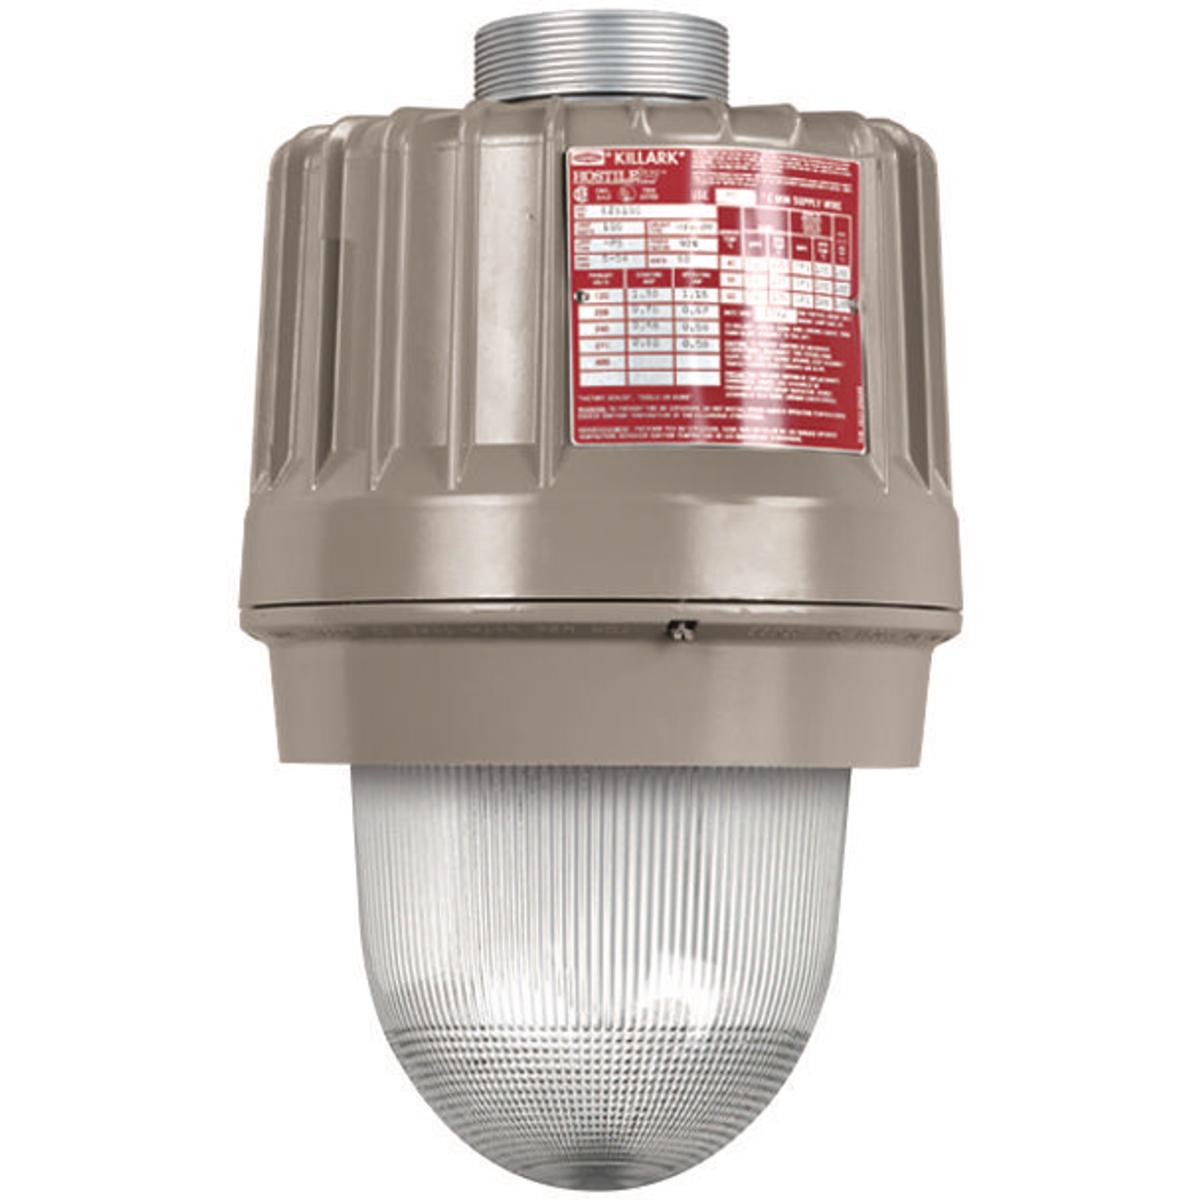 Hubbell EZS078 HID 70W 240V High Pressure Sodium Housing Globe and Globe  ; Three light sources – High Pressure Sodium (50-400W), Metal Halide (70-400W) and Pulse Start Metal Halide (175-400W) ; Mounting choice –Pendant, ceiling, 25˚ stanchion or 90˚ wall mount, all wit